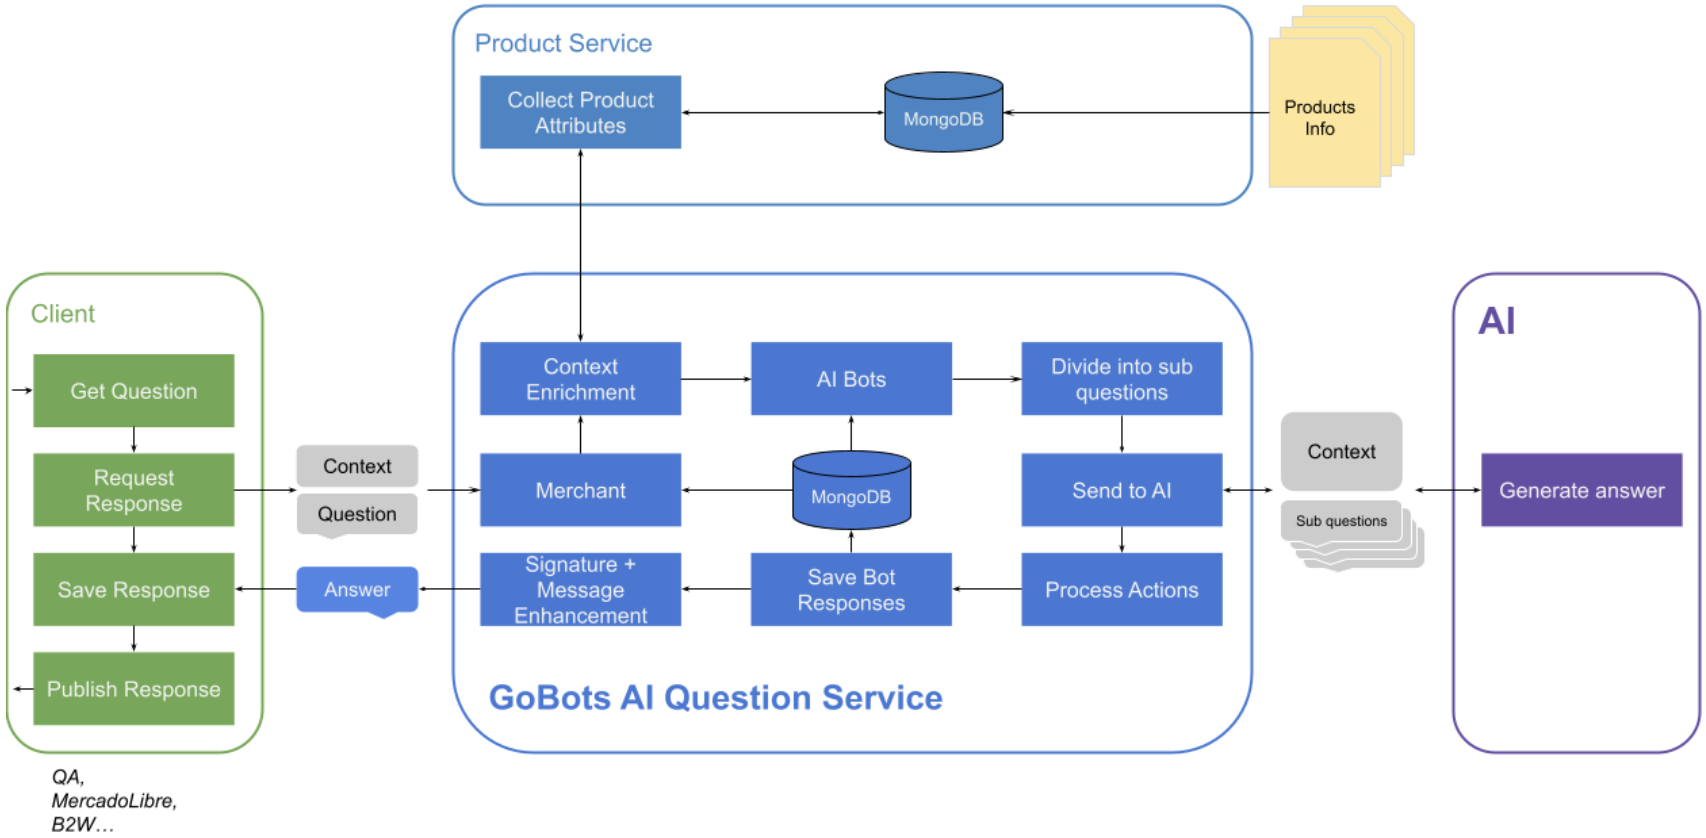 Diagram of the GoBots question processing architecture. The architecture is split into 4 buckets; client, product service, AI, and GoBots AI Question Service